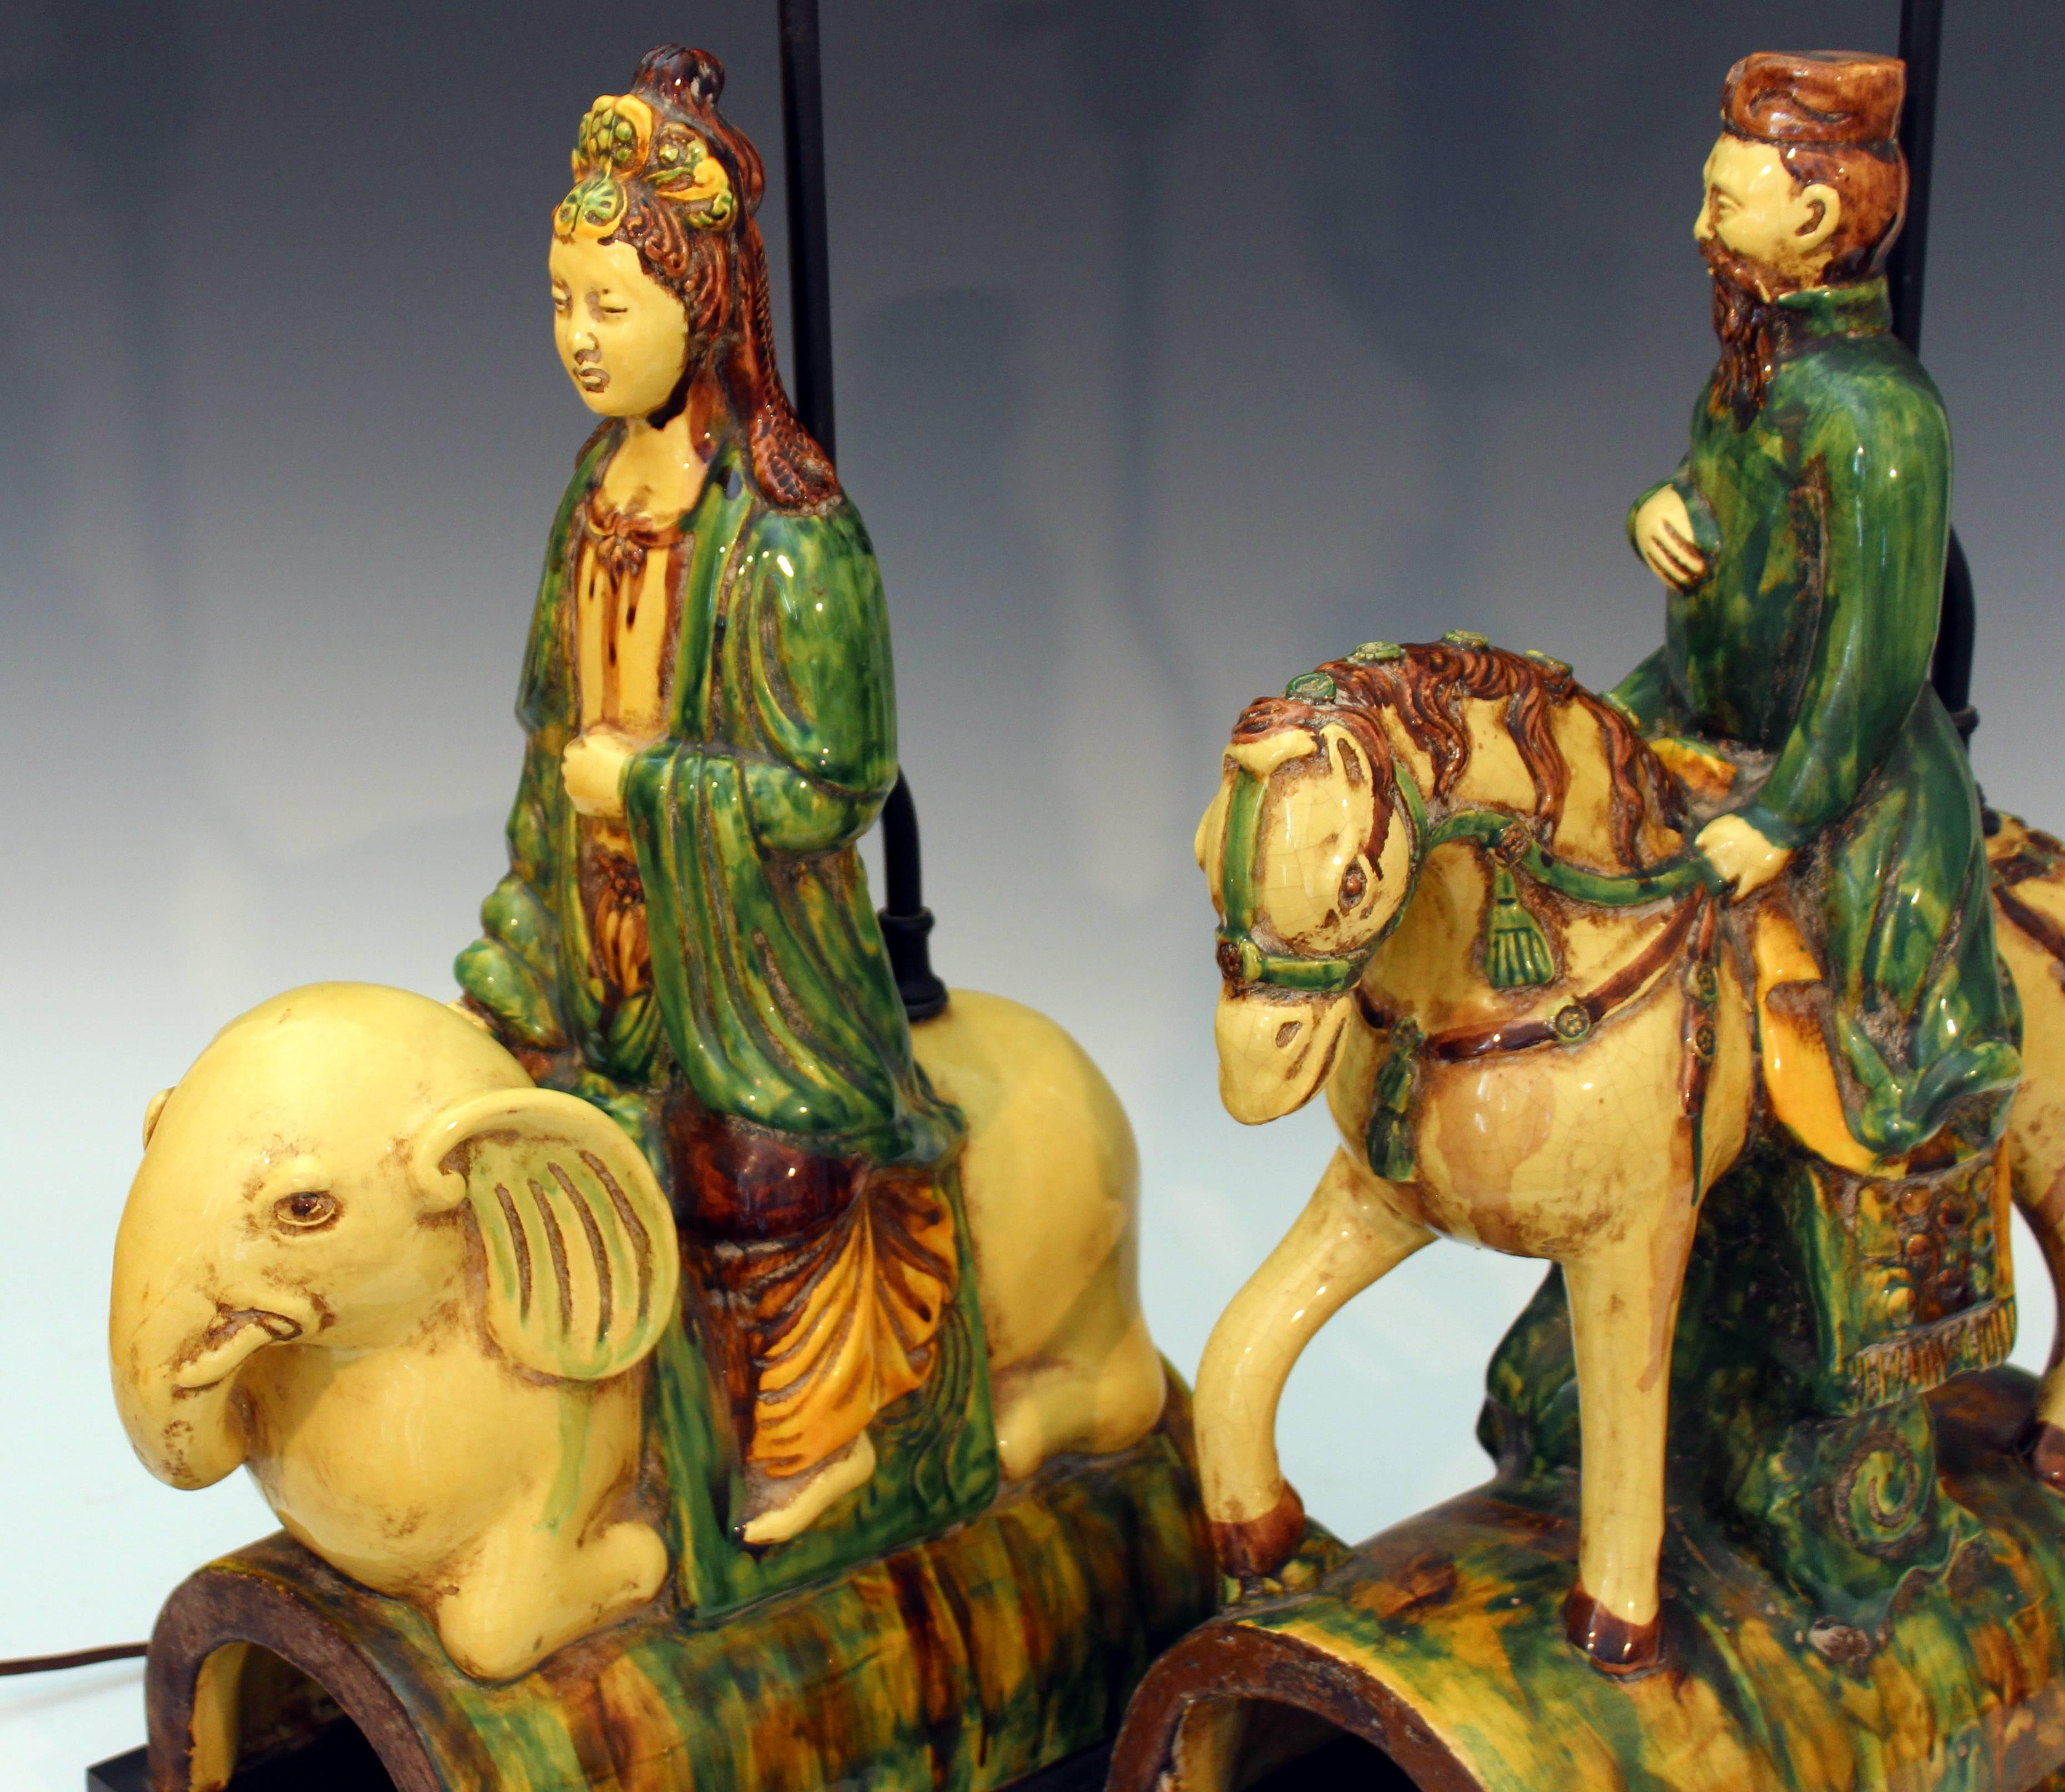 20th Century Pair of Zaccagnini Guanyin Buddha Figures Vintage Italian Ming Roof Tile Lamps